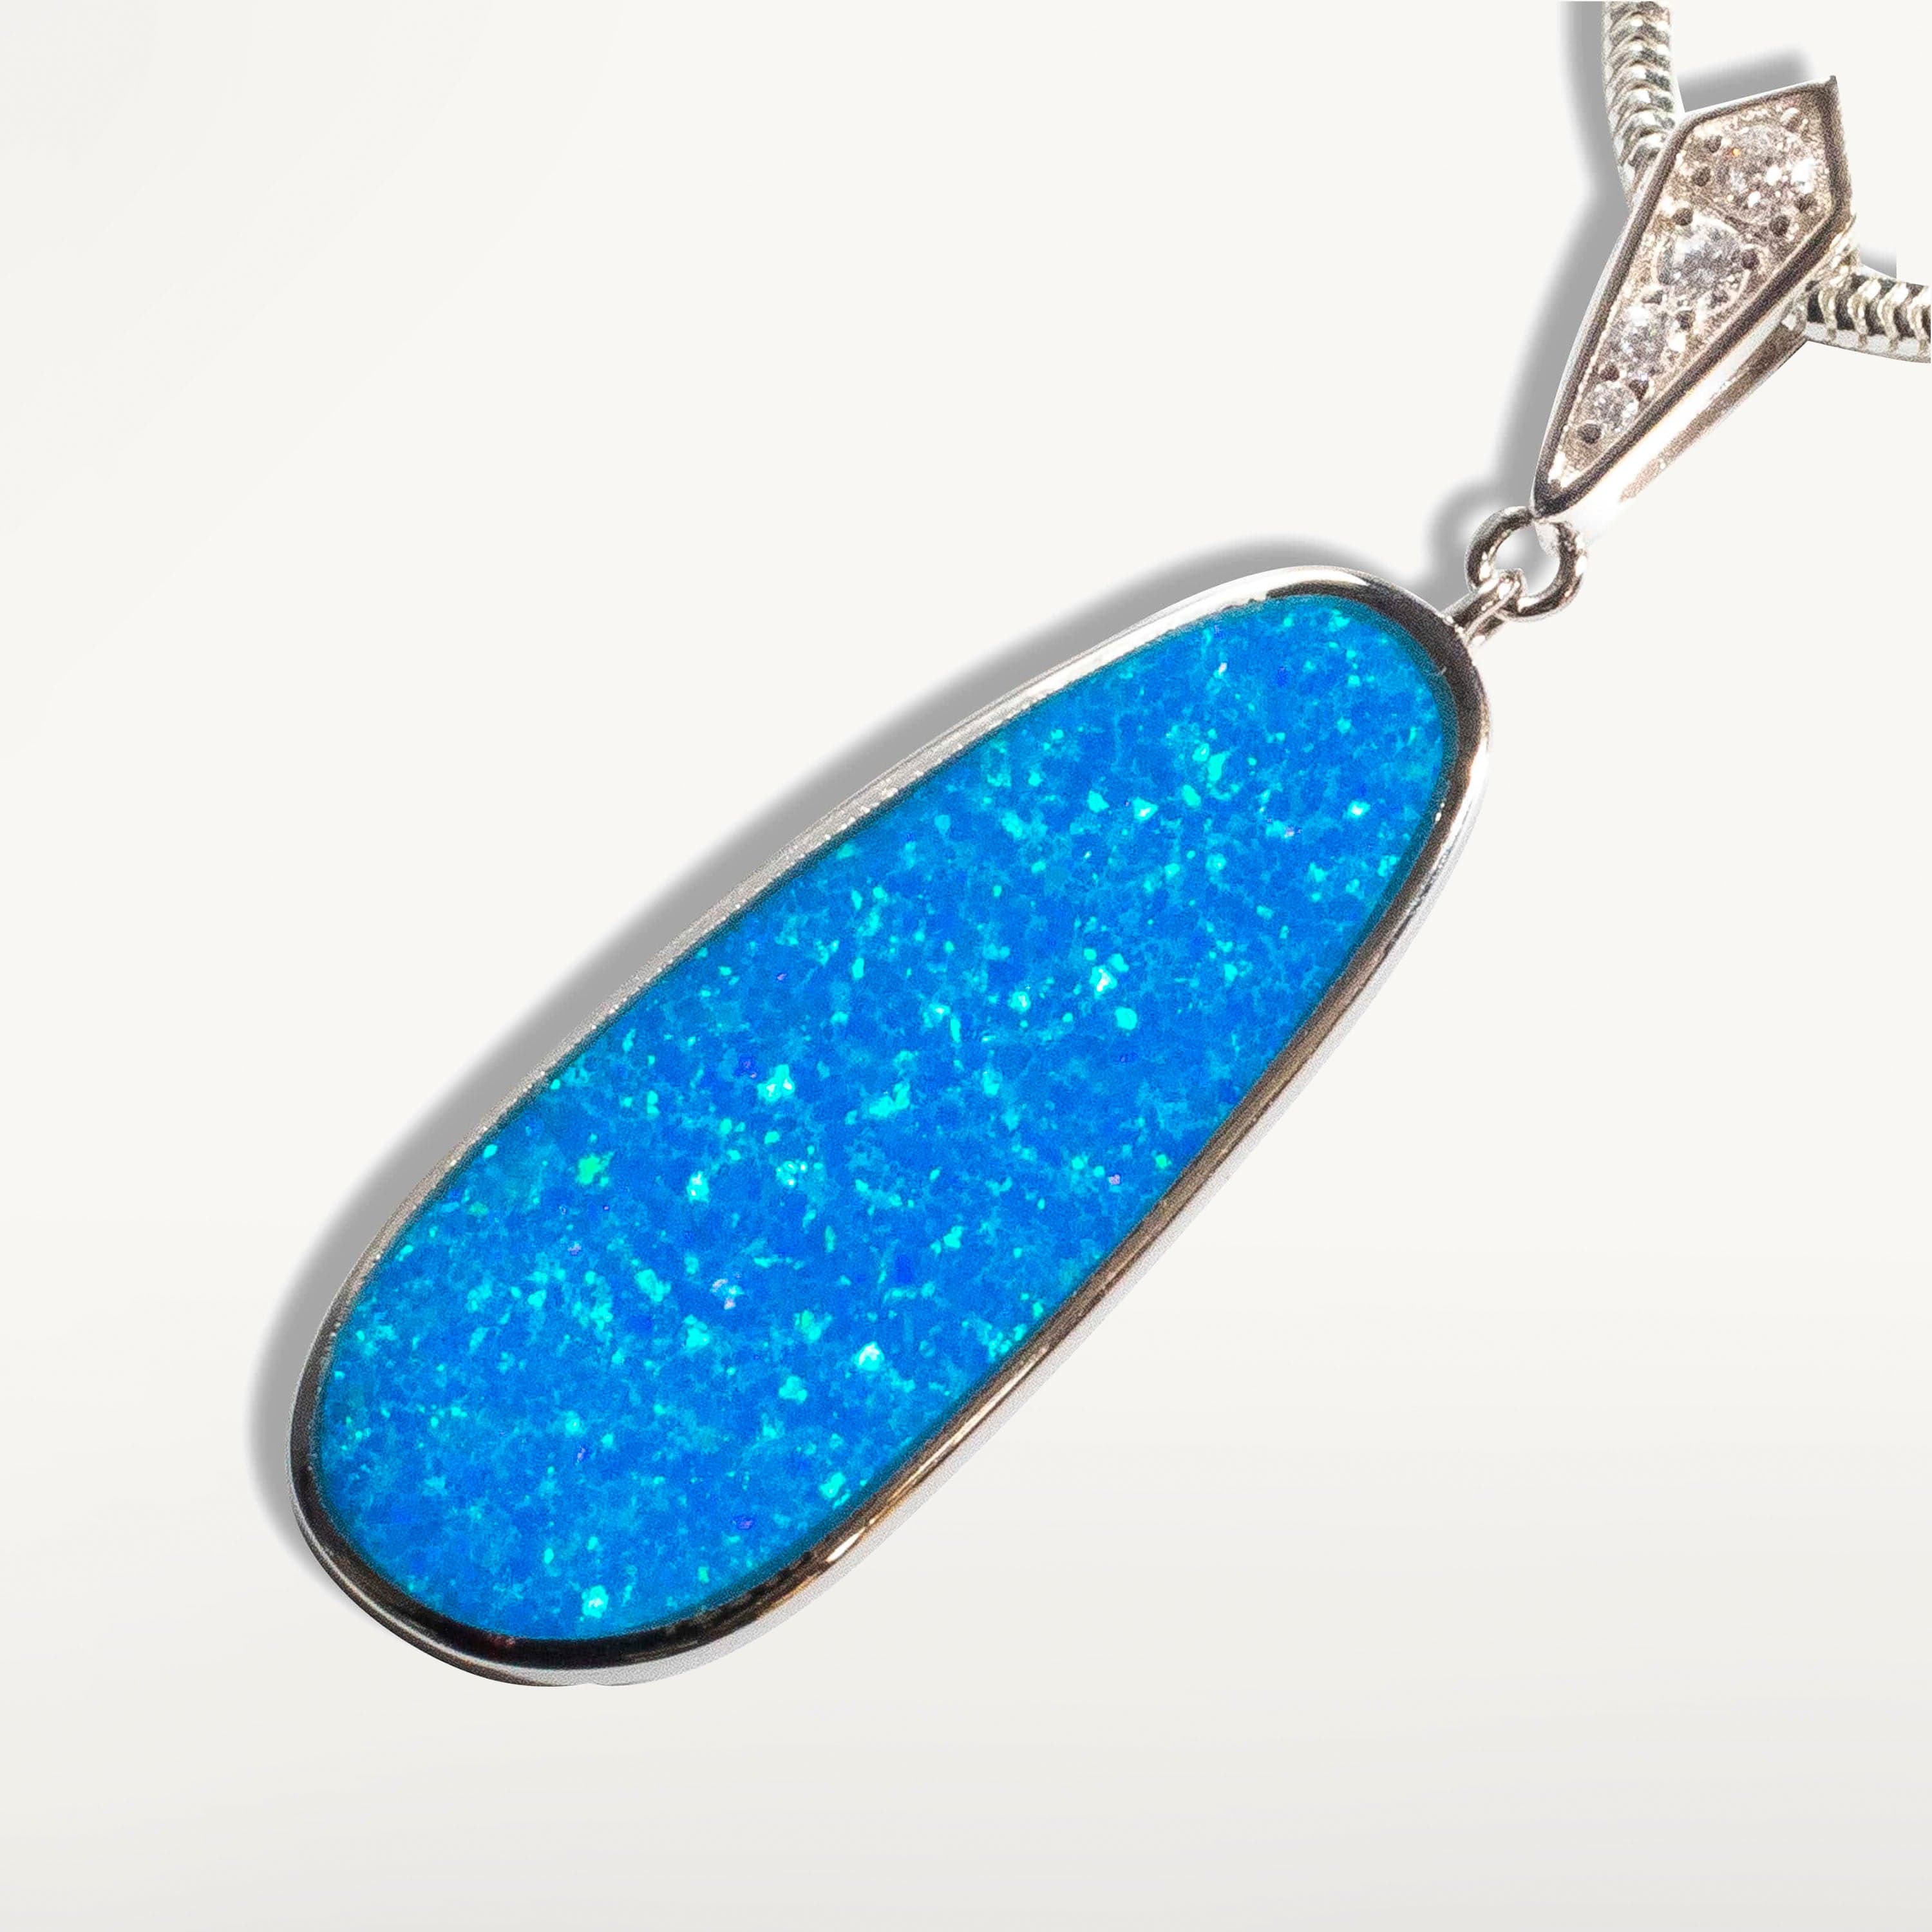 Kalifano Sterling Silver Opalite Sterling Silver Aqua Opal Teardrop Pendant with Sterling Silver Chain OPLP-33563-AO